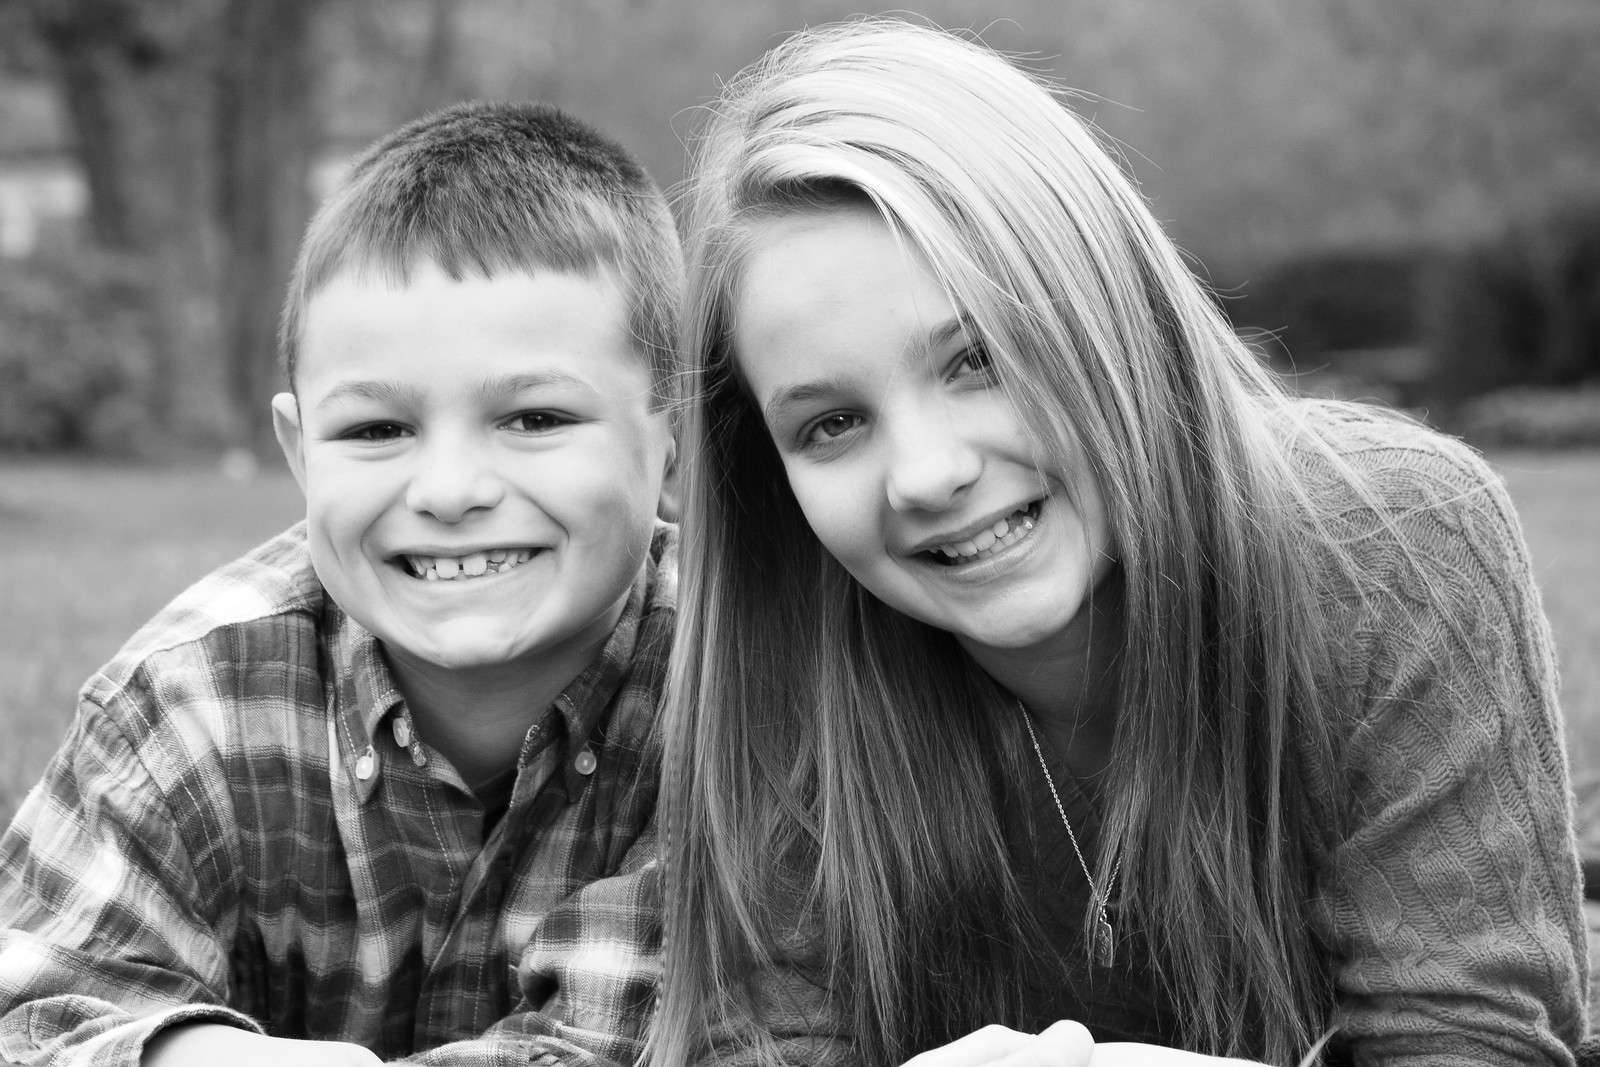 family portraits, family photographer, ct family photographer, families, siblings, outdoor family photography, black and white photography